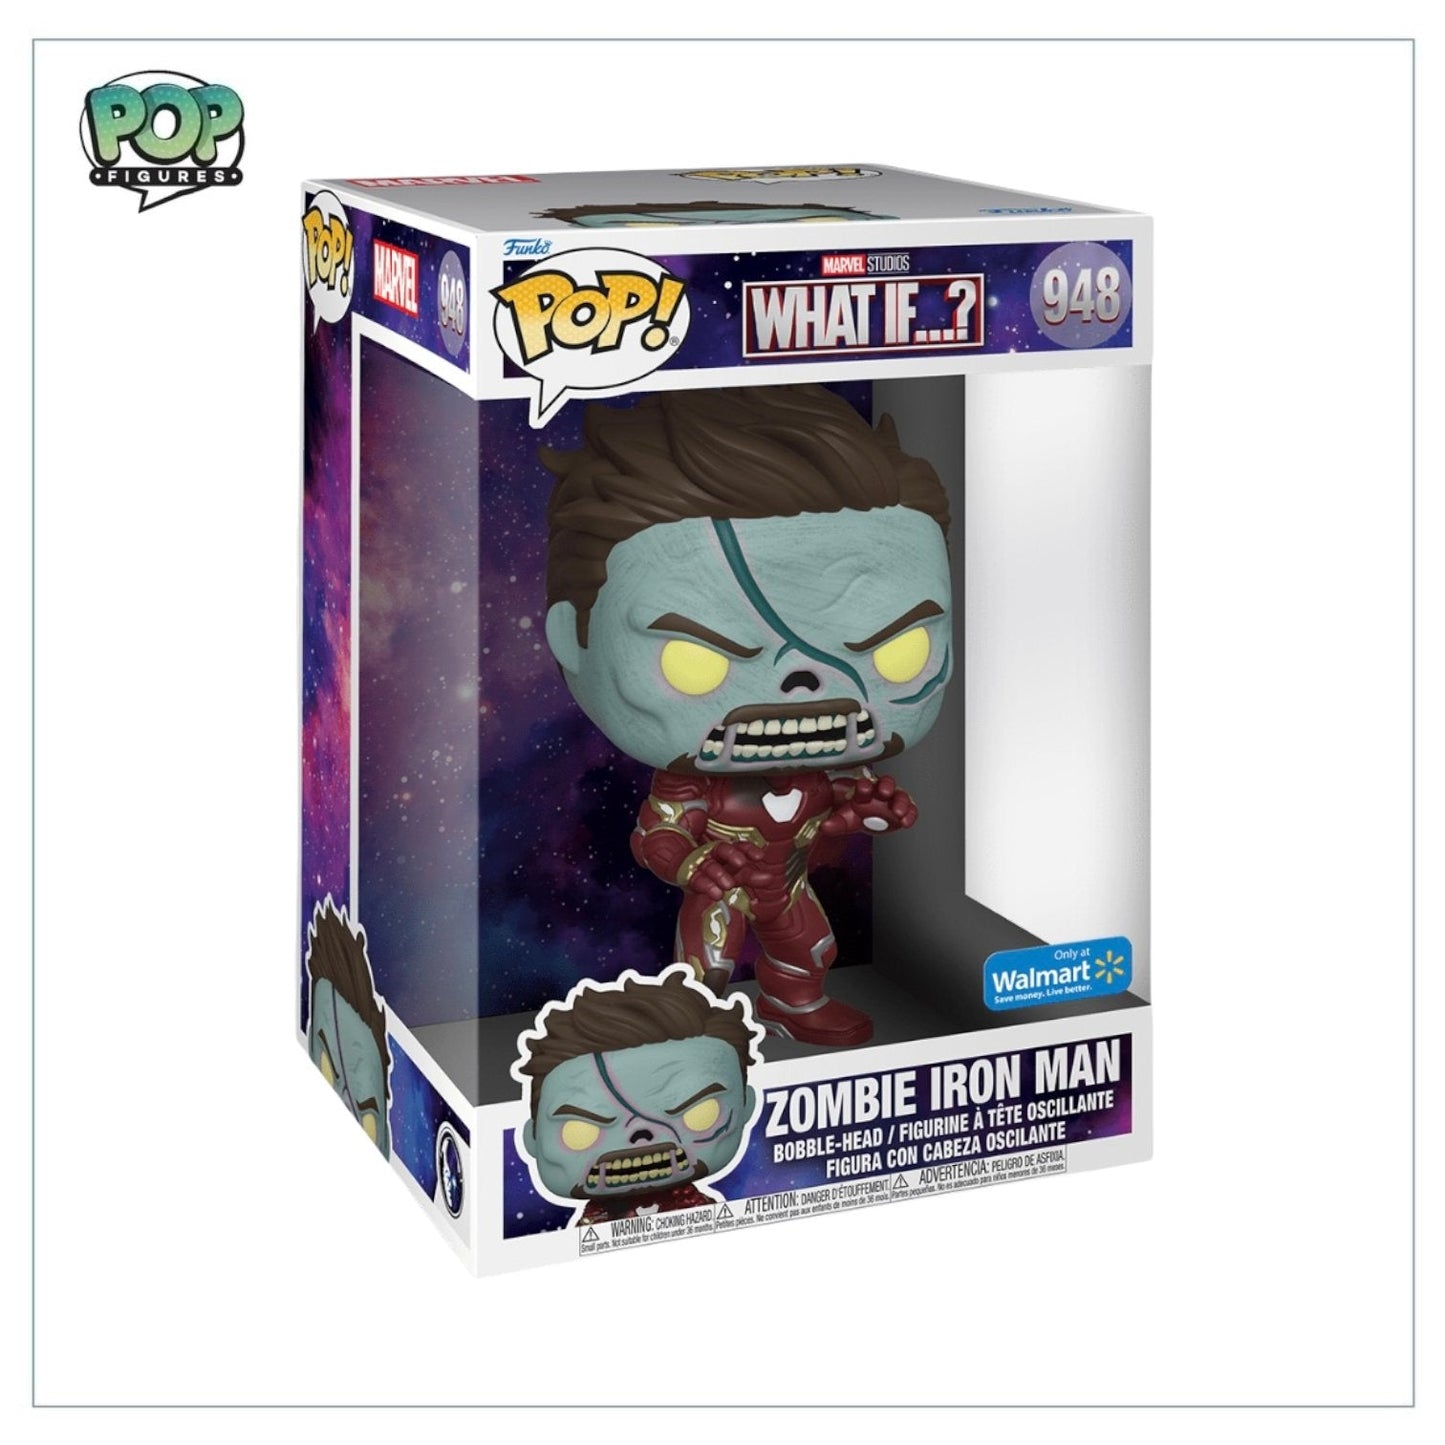 Zombie Iron Man #948 Deluxe 10” Funko Pop! Marvel What If…?  Walmart Exclusive - Angry Cat